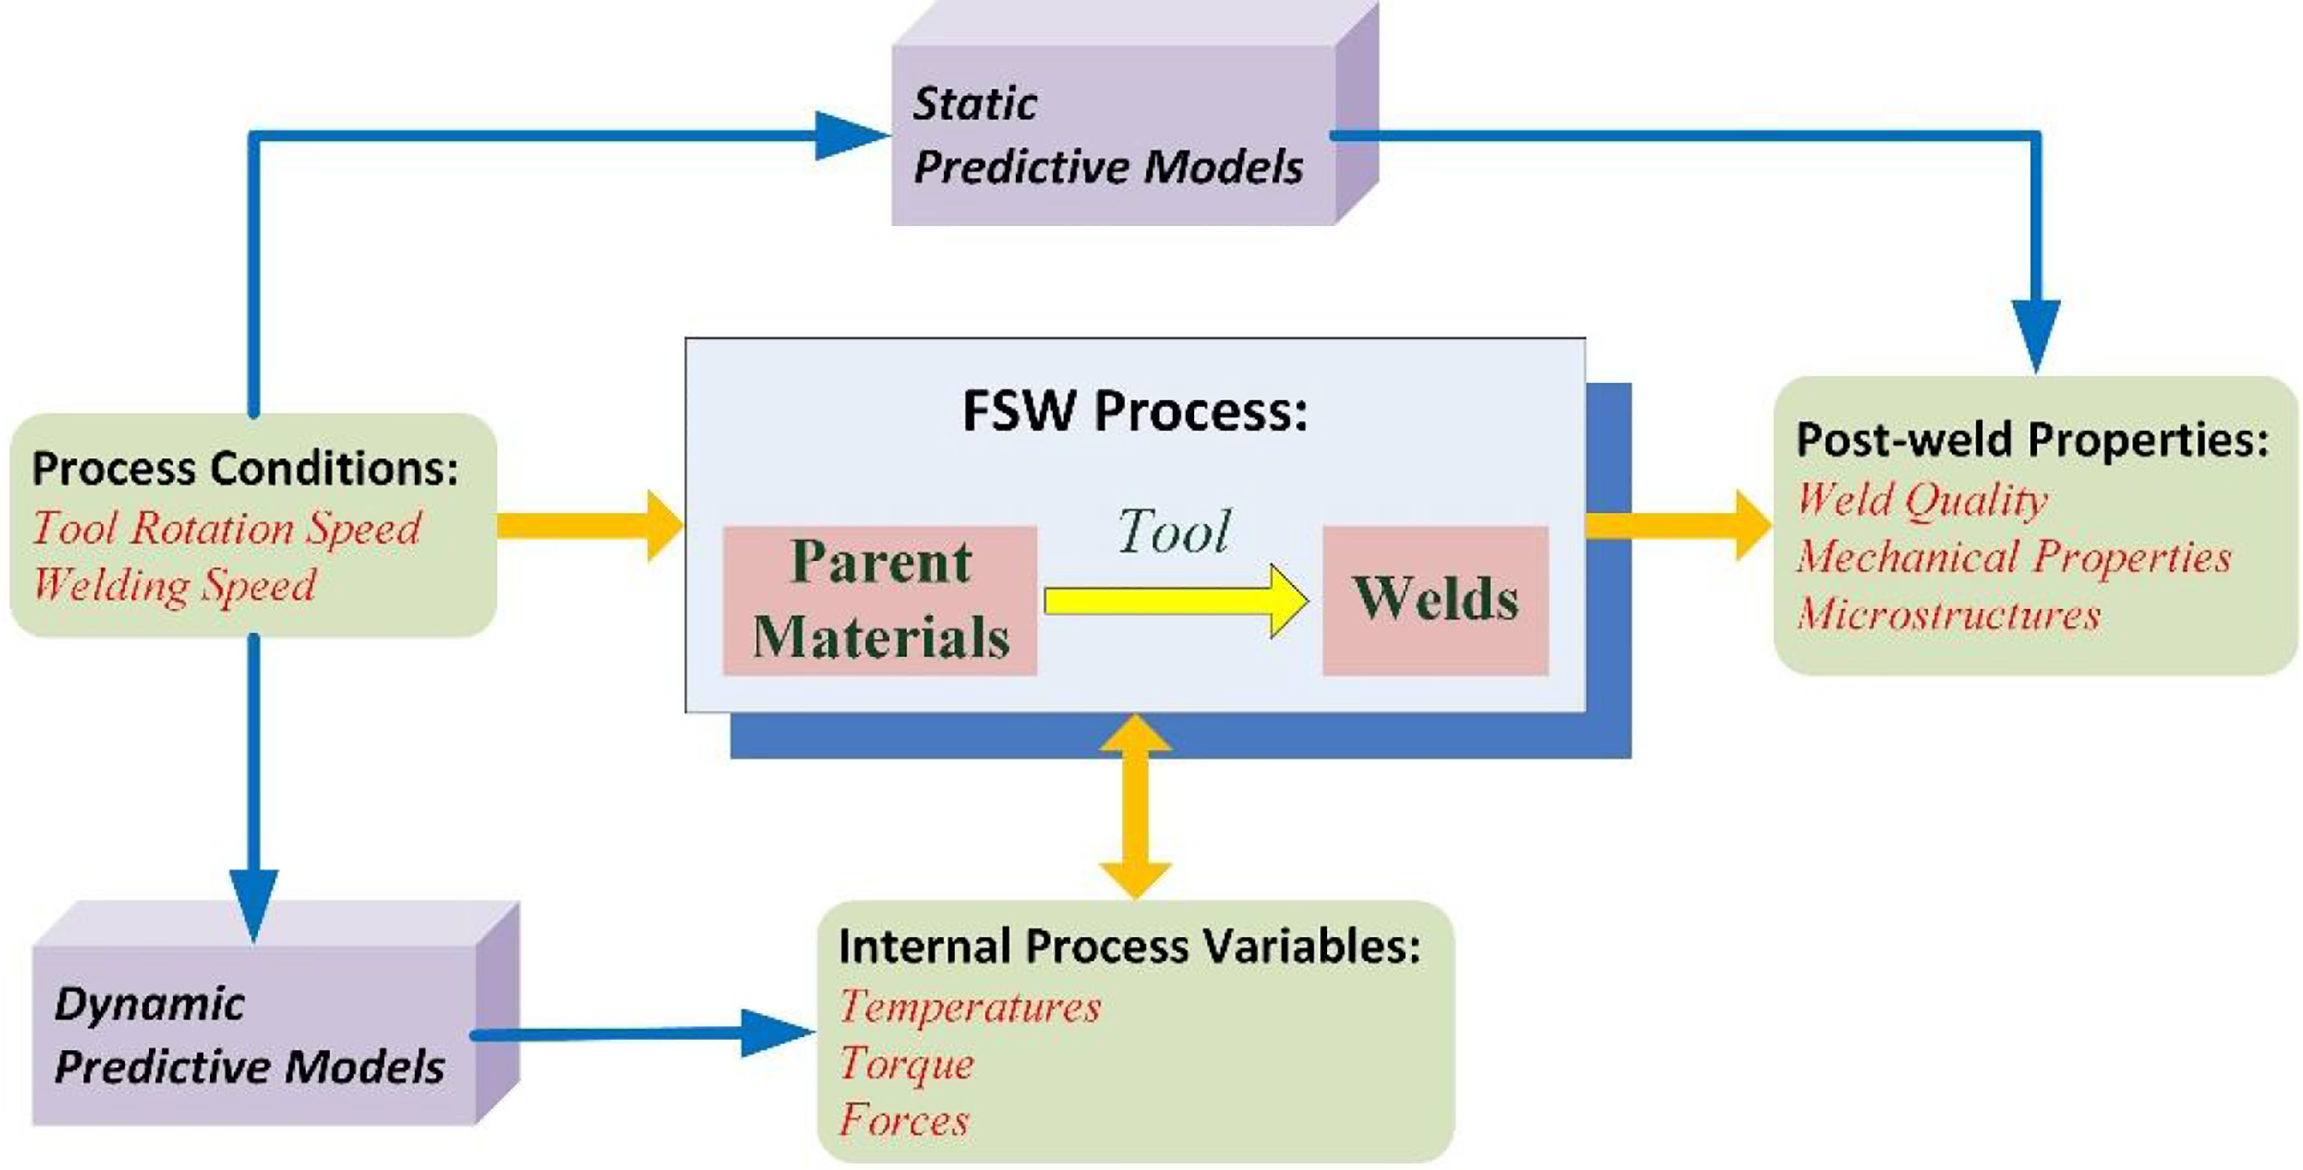 3. Essential properties and developed models for FSW